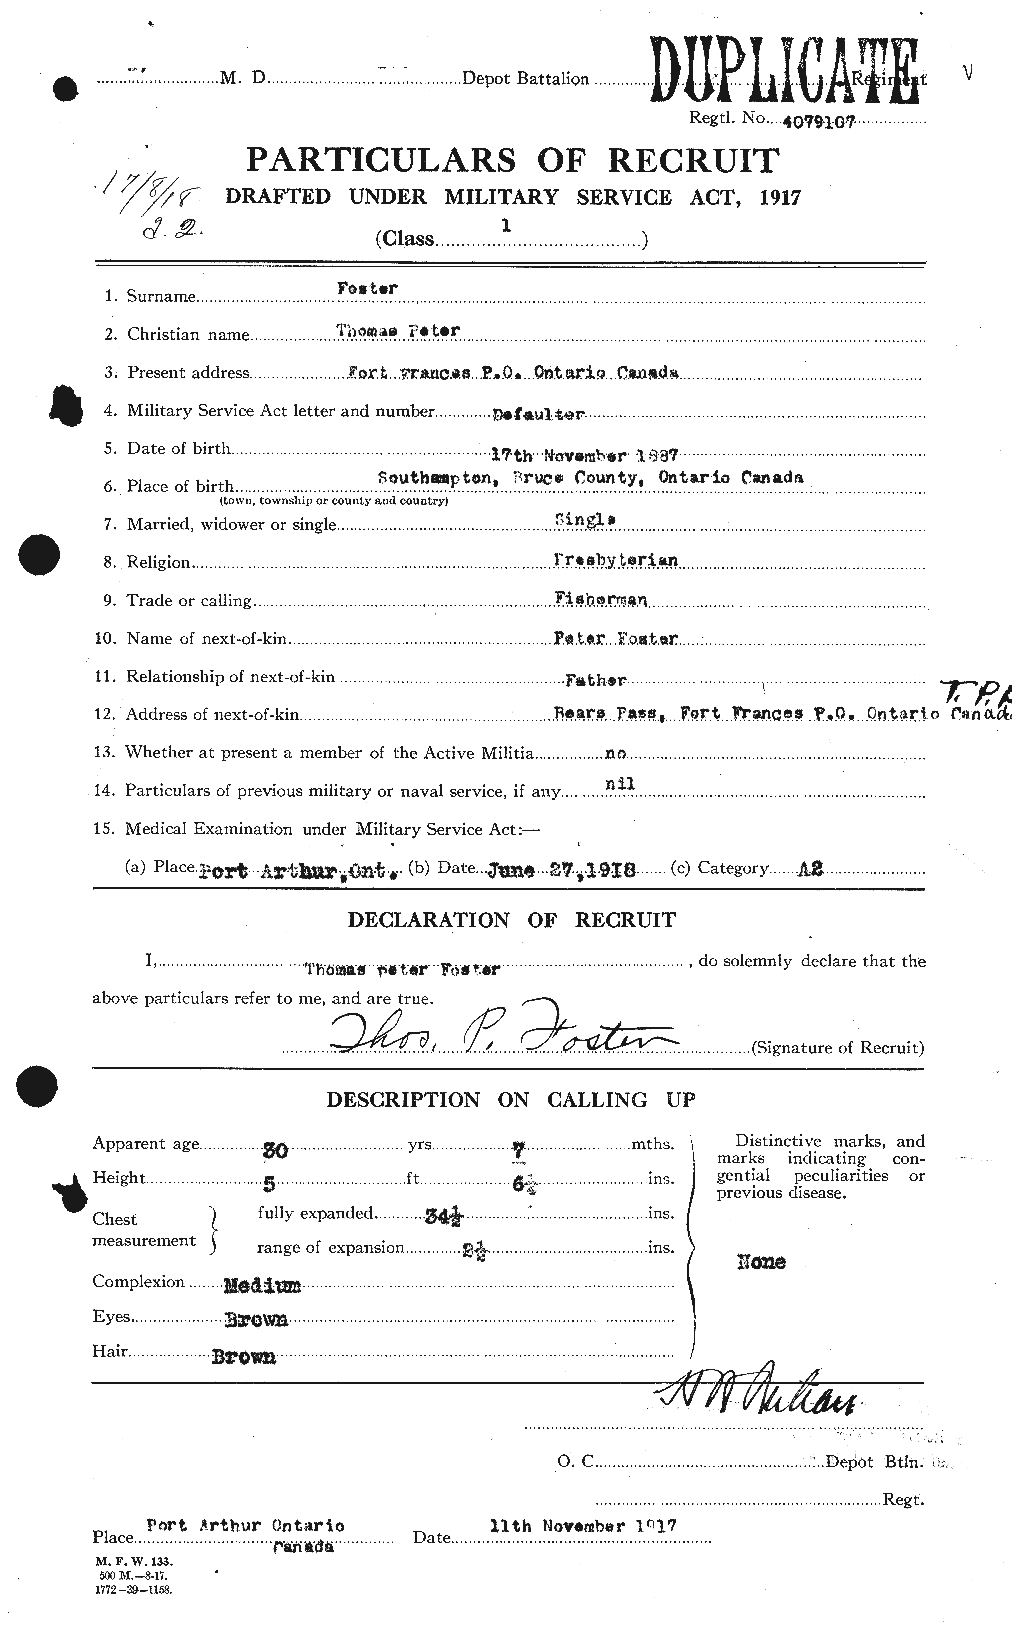 Personnel Records of the First World War - CEF 335245a